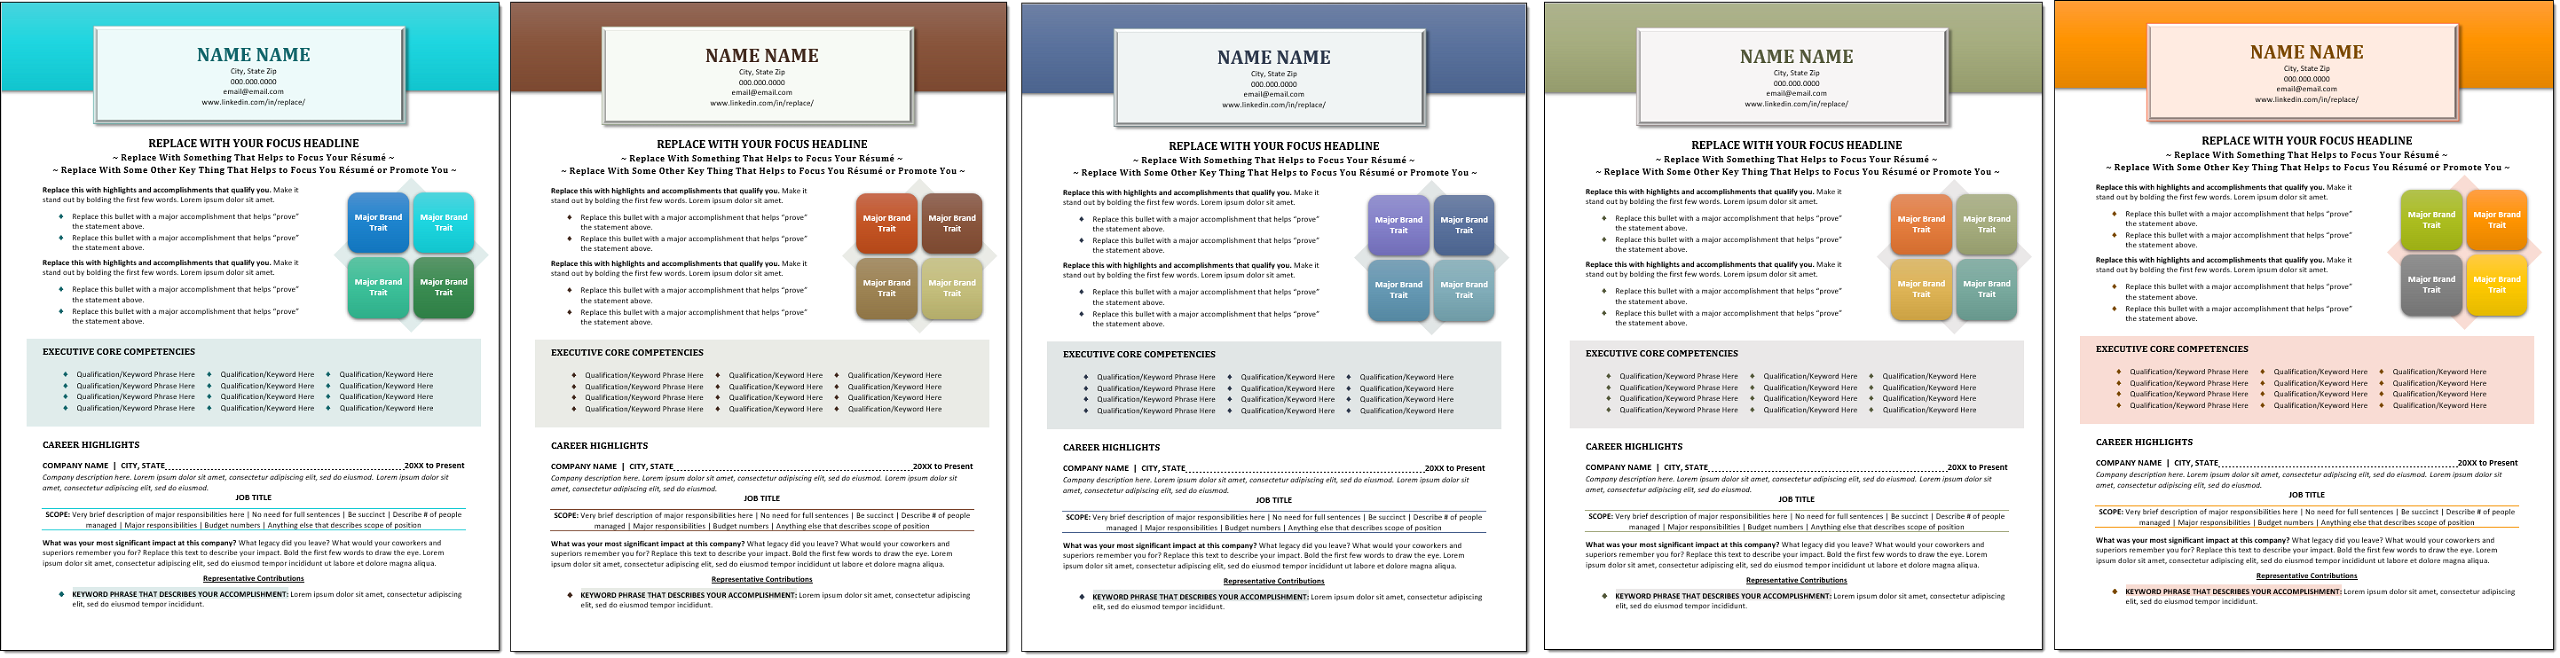 Executive Resume Template Color Choices